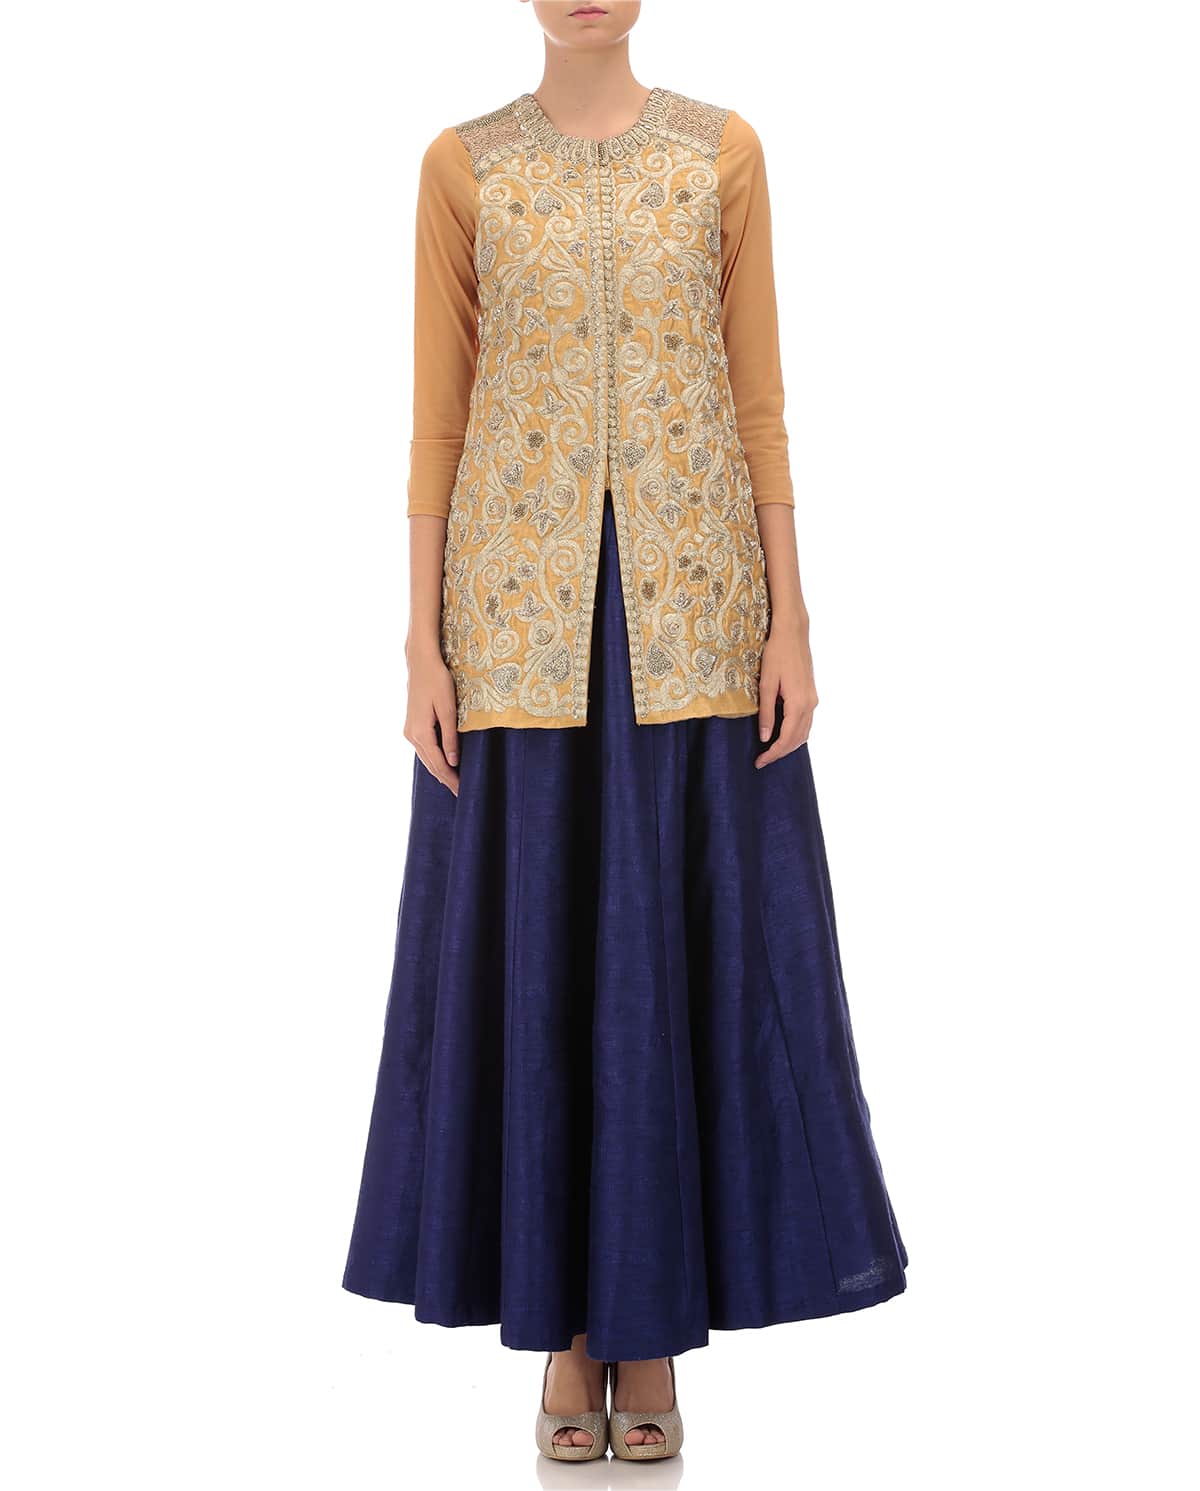 gold zari embroidered jacket with blue silk skirt.